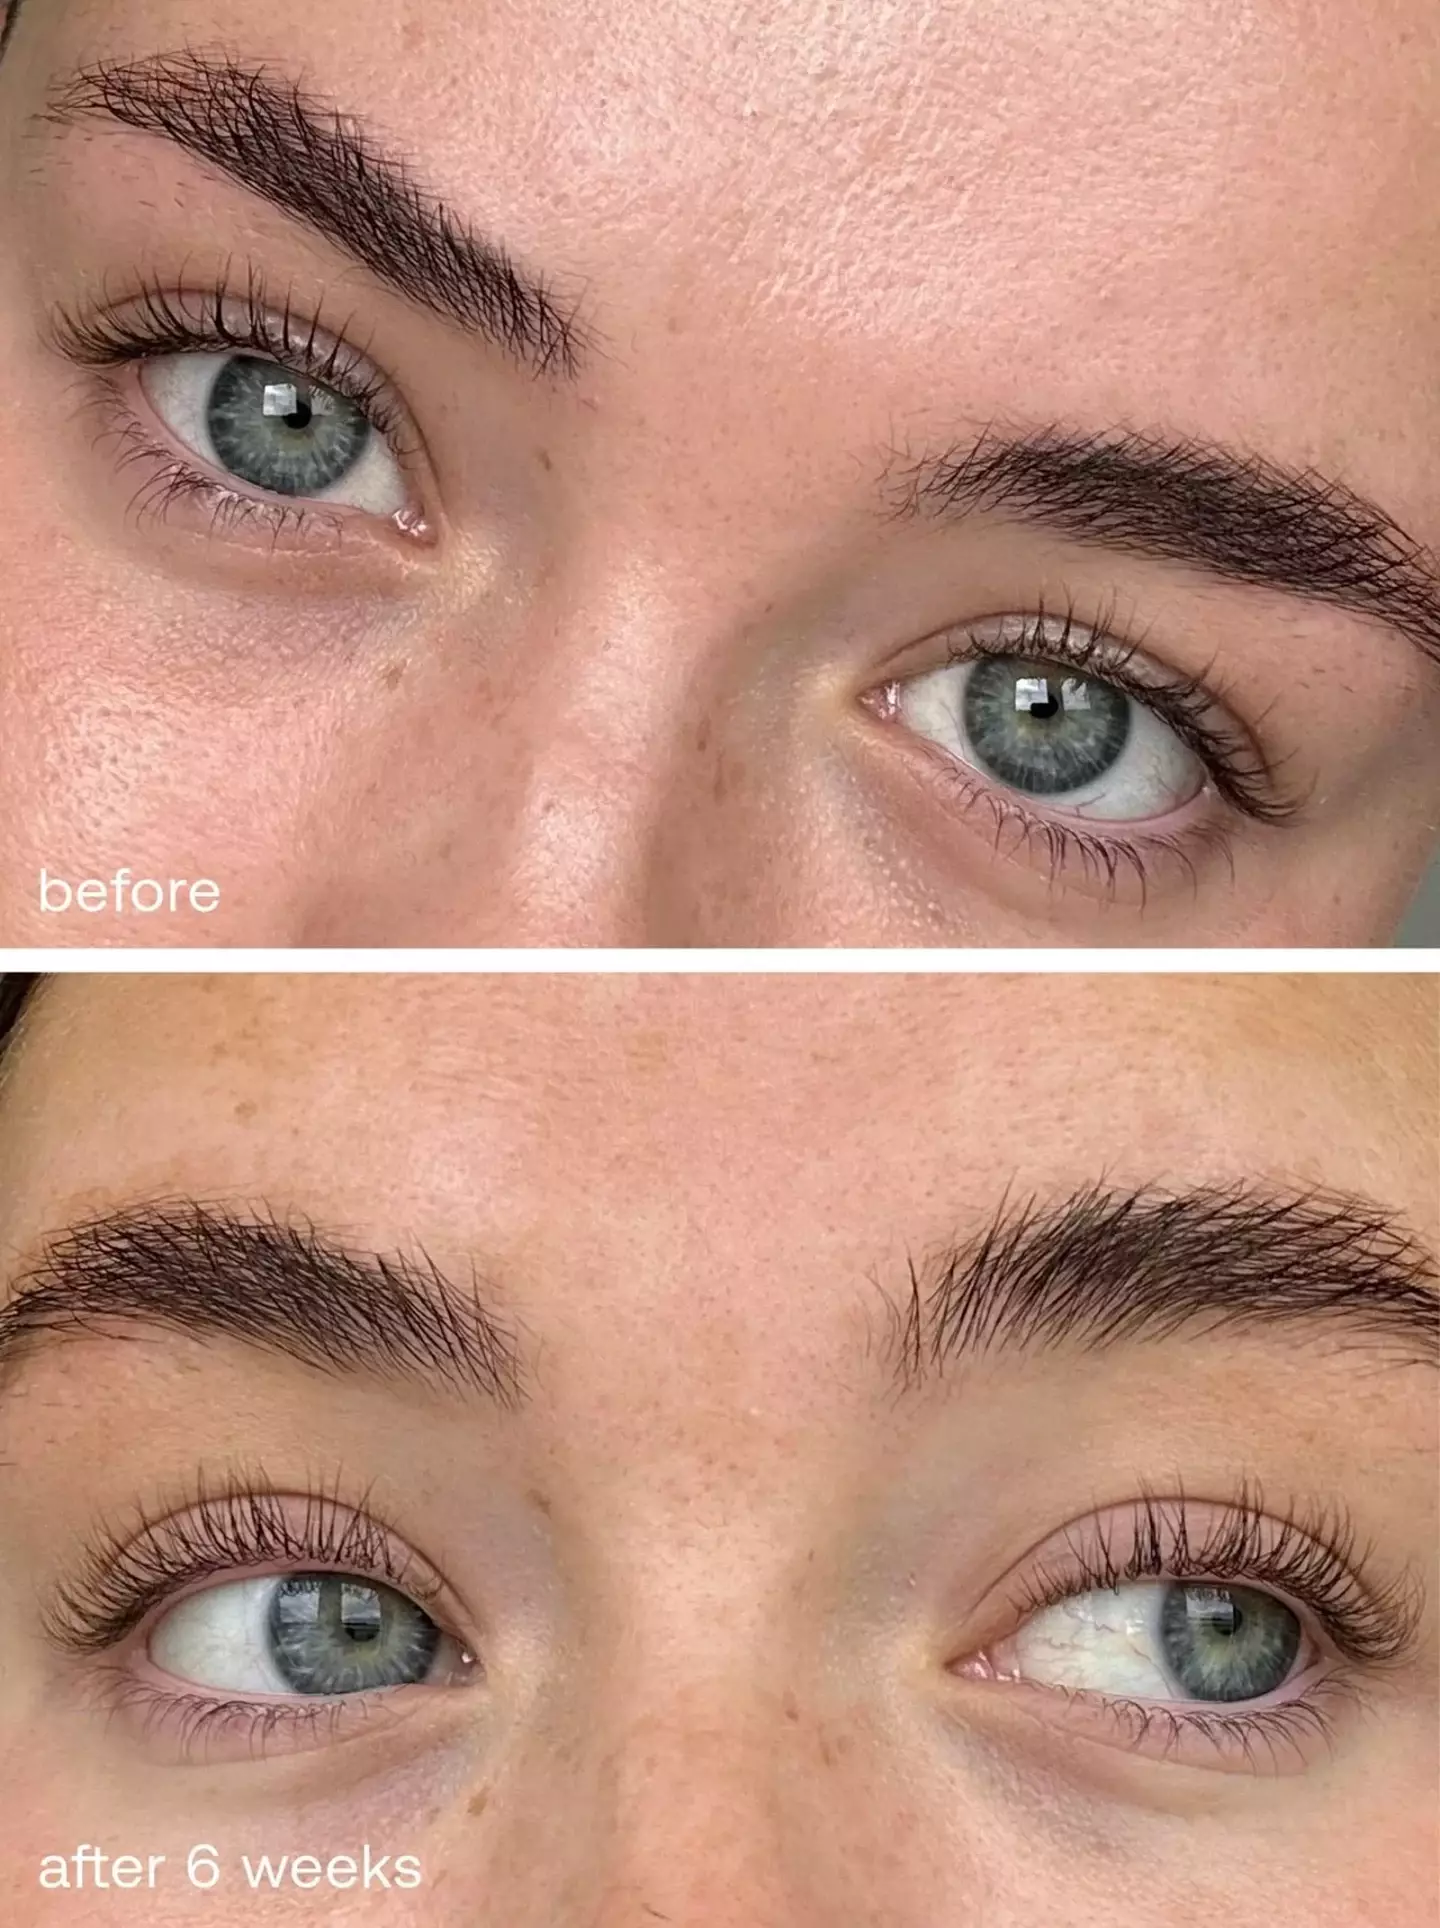 The results truly do speak for themselves. (UKLASH)